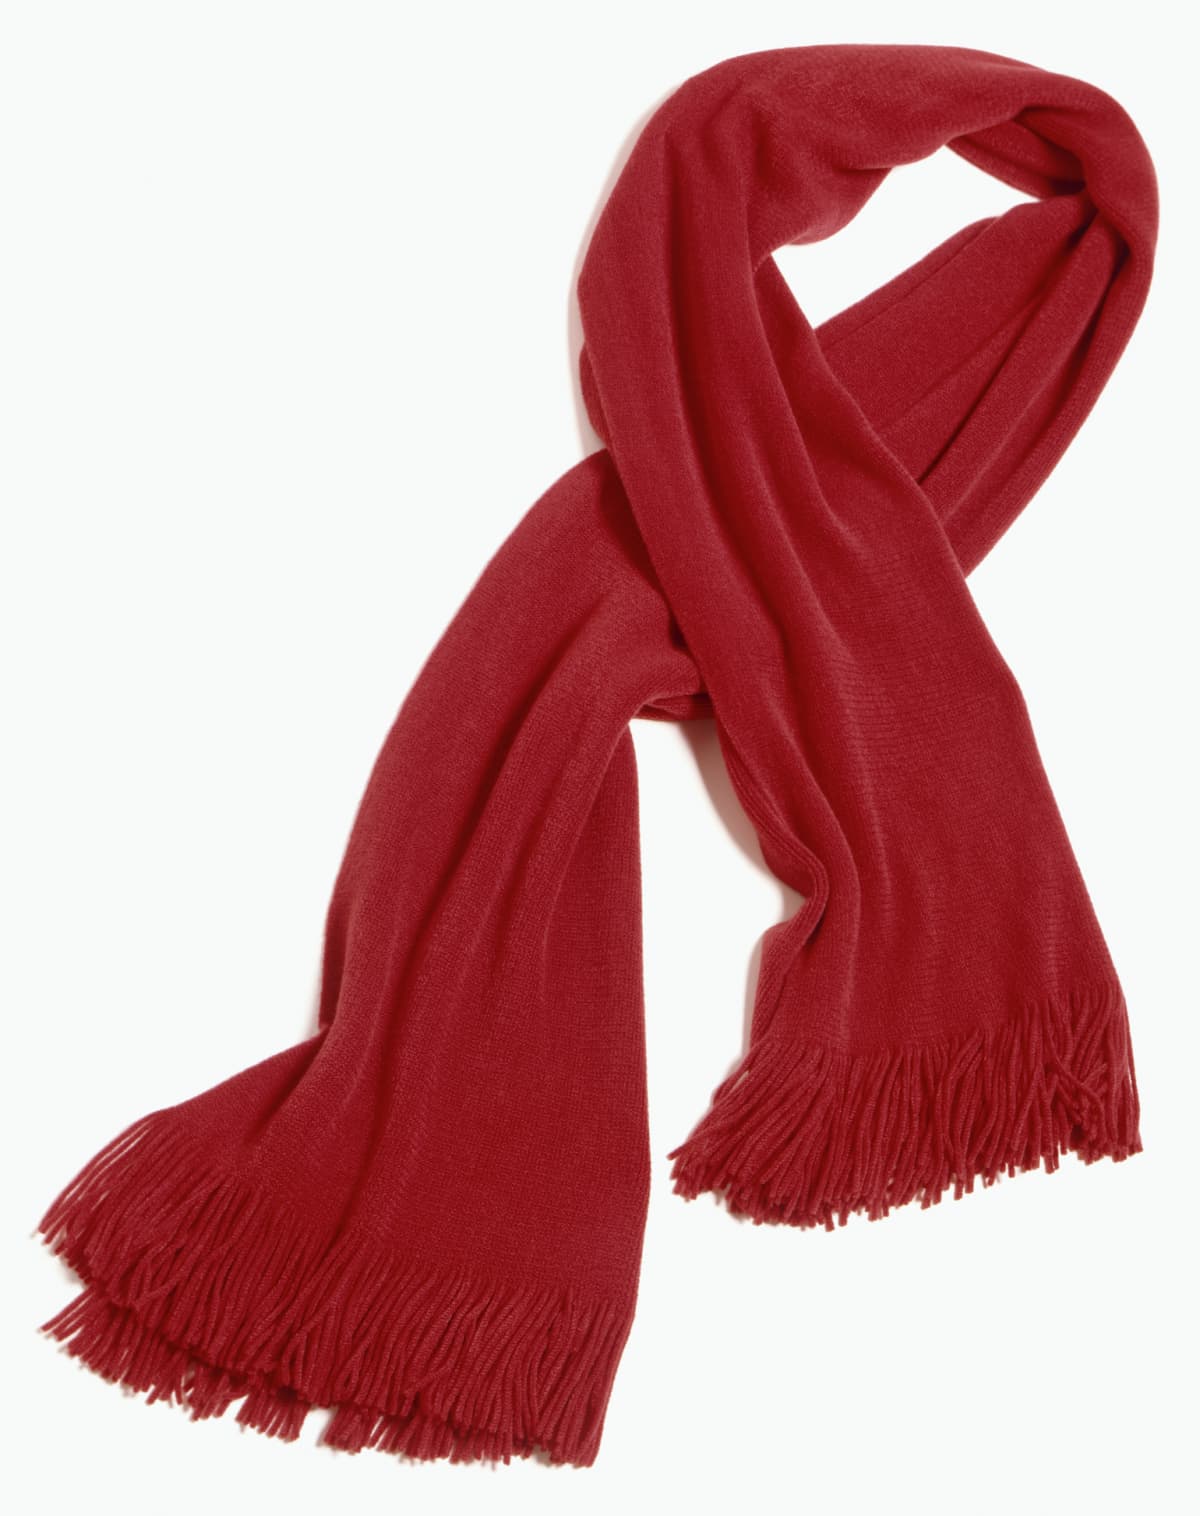 Red scarf on white background